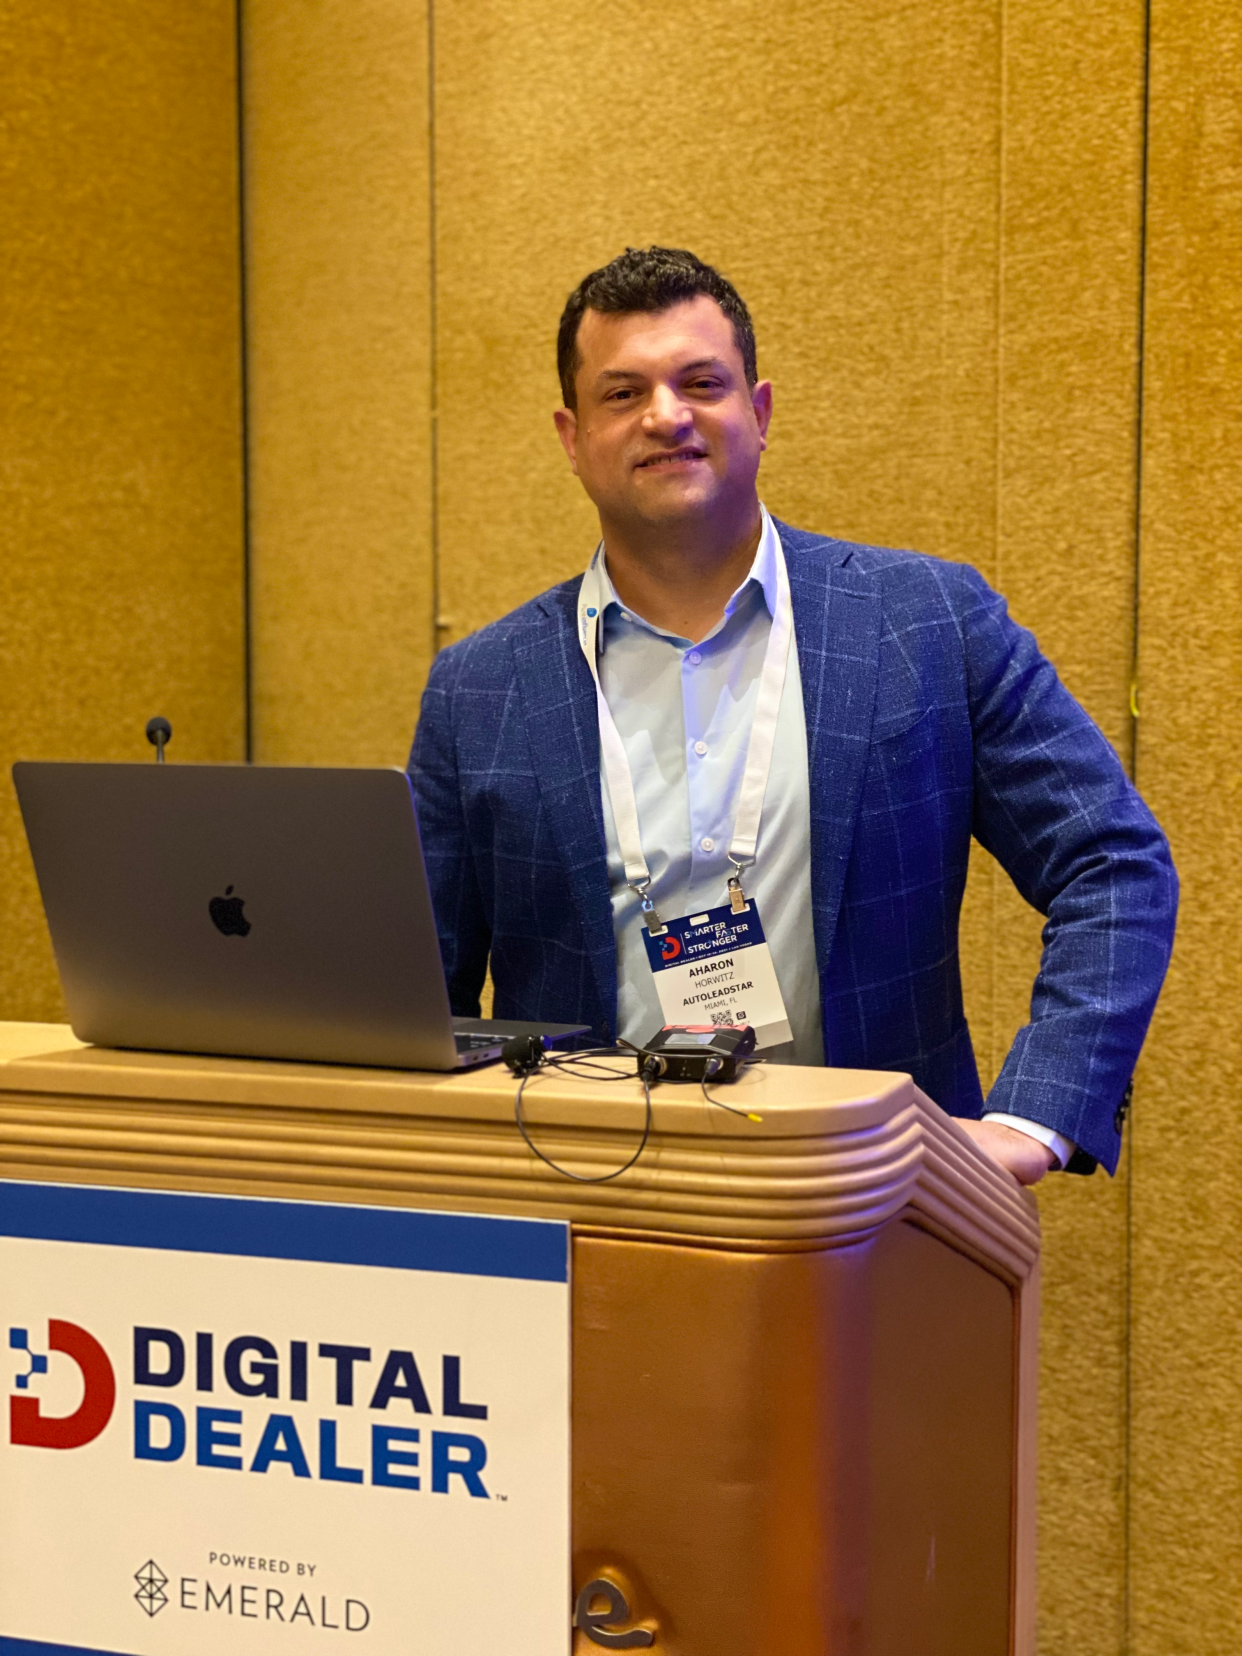 Aharon Horwitz, CEO of Fullpath, runs an AI company that caters to the automotive industry and customer service. He is seen here in October 2021 at a conference in Las Vegas.